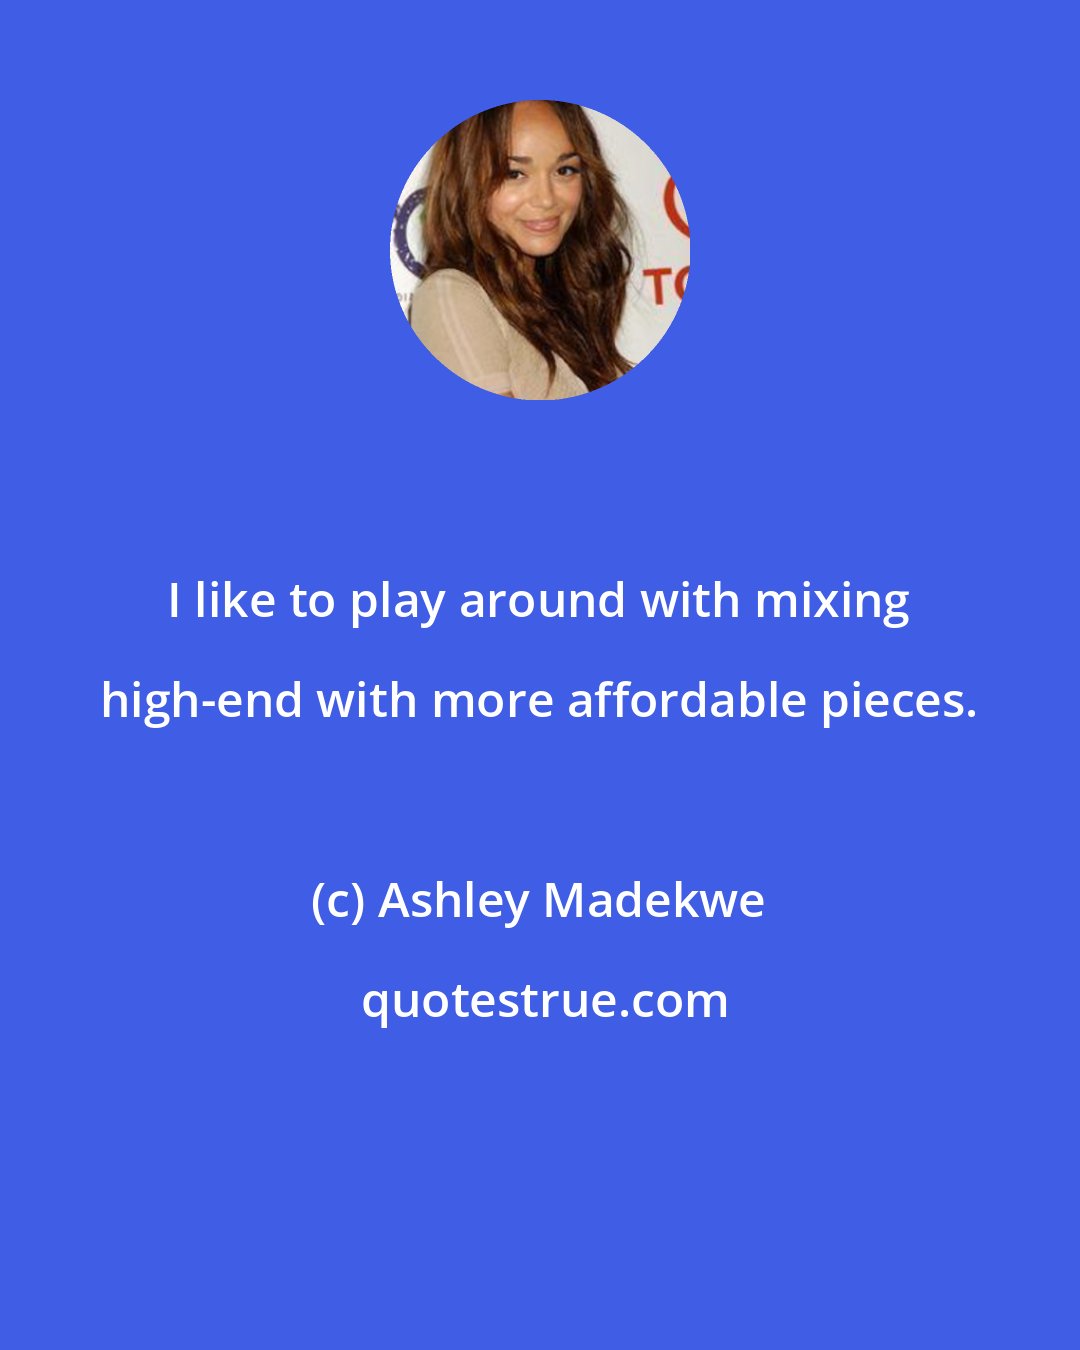 Ashley Madekwe: I like to play around with mixing high-end with more affordable pieces.